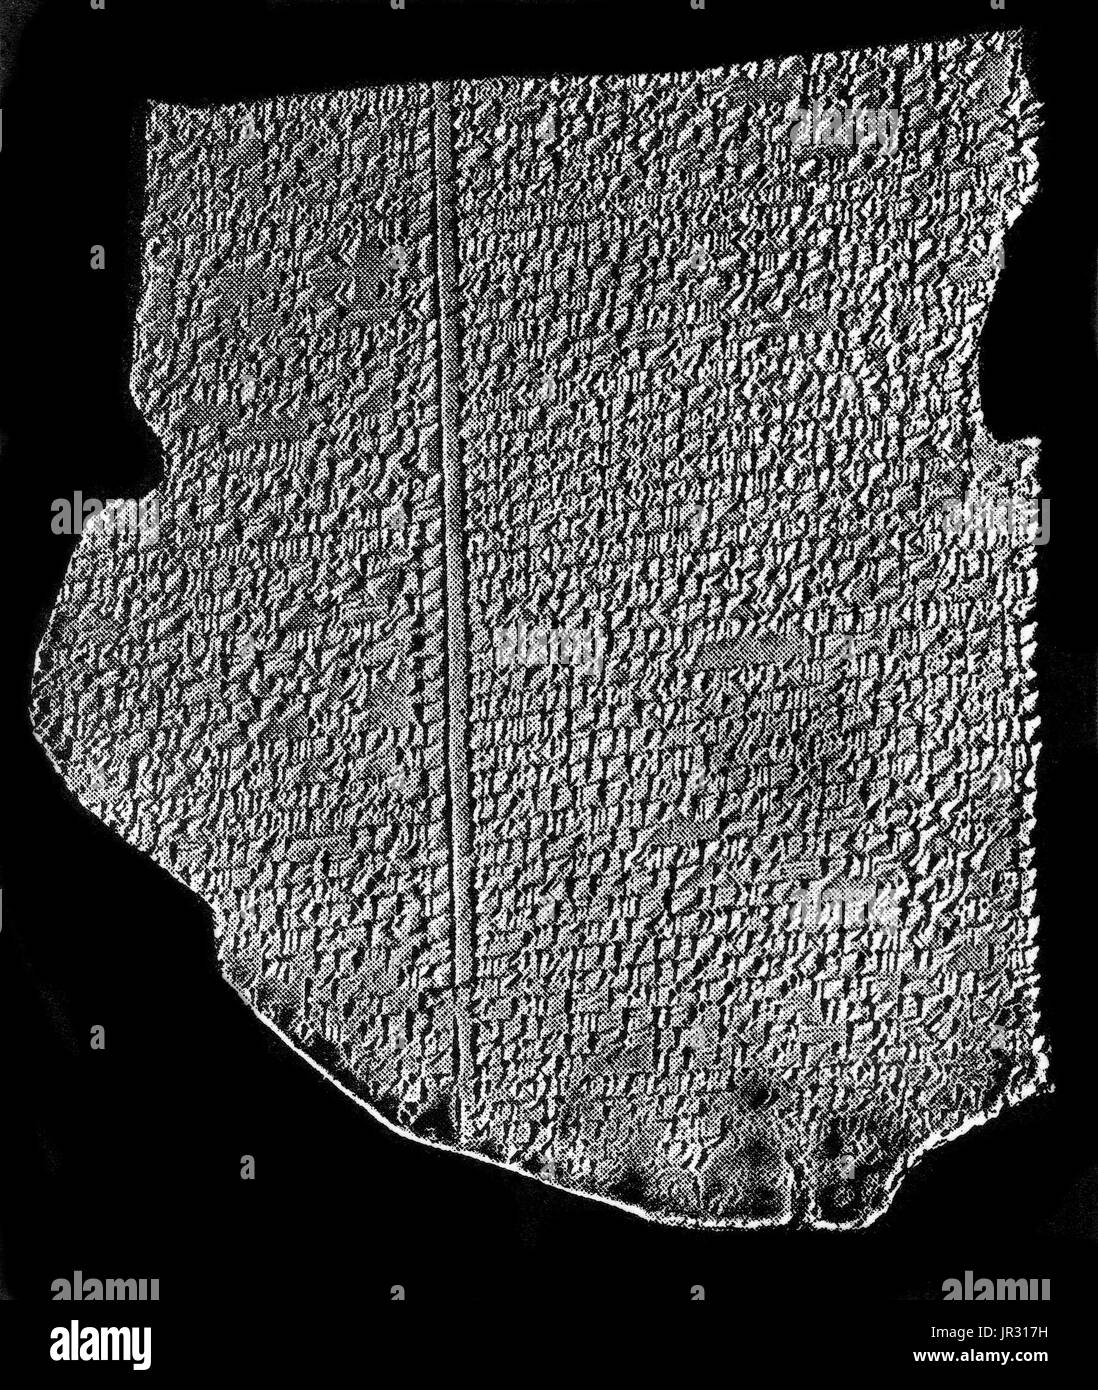 The Amarna tablets are an archive, written on clay tablets, primarily consisting of diplomatic correspondence between the Egyptian administration and its representatives in Canaan and Amurru during the New Kingdom. The Amarna letters are unusual in Egyptological research, because they are mostly written in Akkadian cuneiform, the writing system of ancient Mesopotamia, rather than that of ancient Egypt. The written correspondence spans a period of at most thirty years. The Amarna letters are of great significance for biblical studies as well as Semitic linguistics, since they shed light on the  Stock Photo